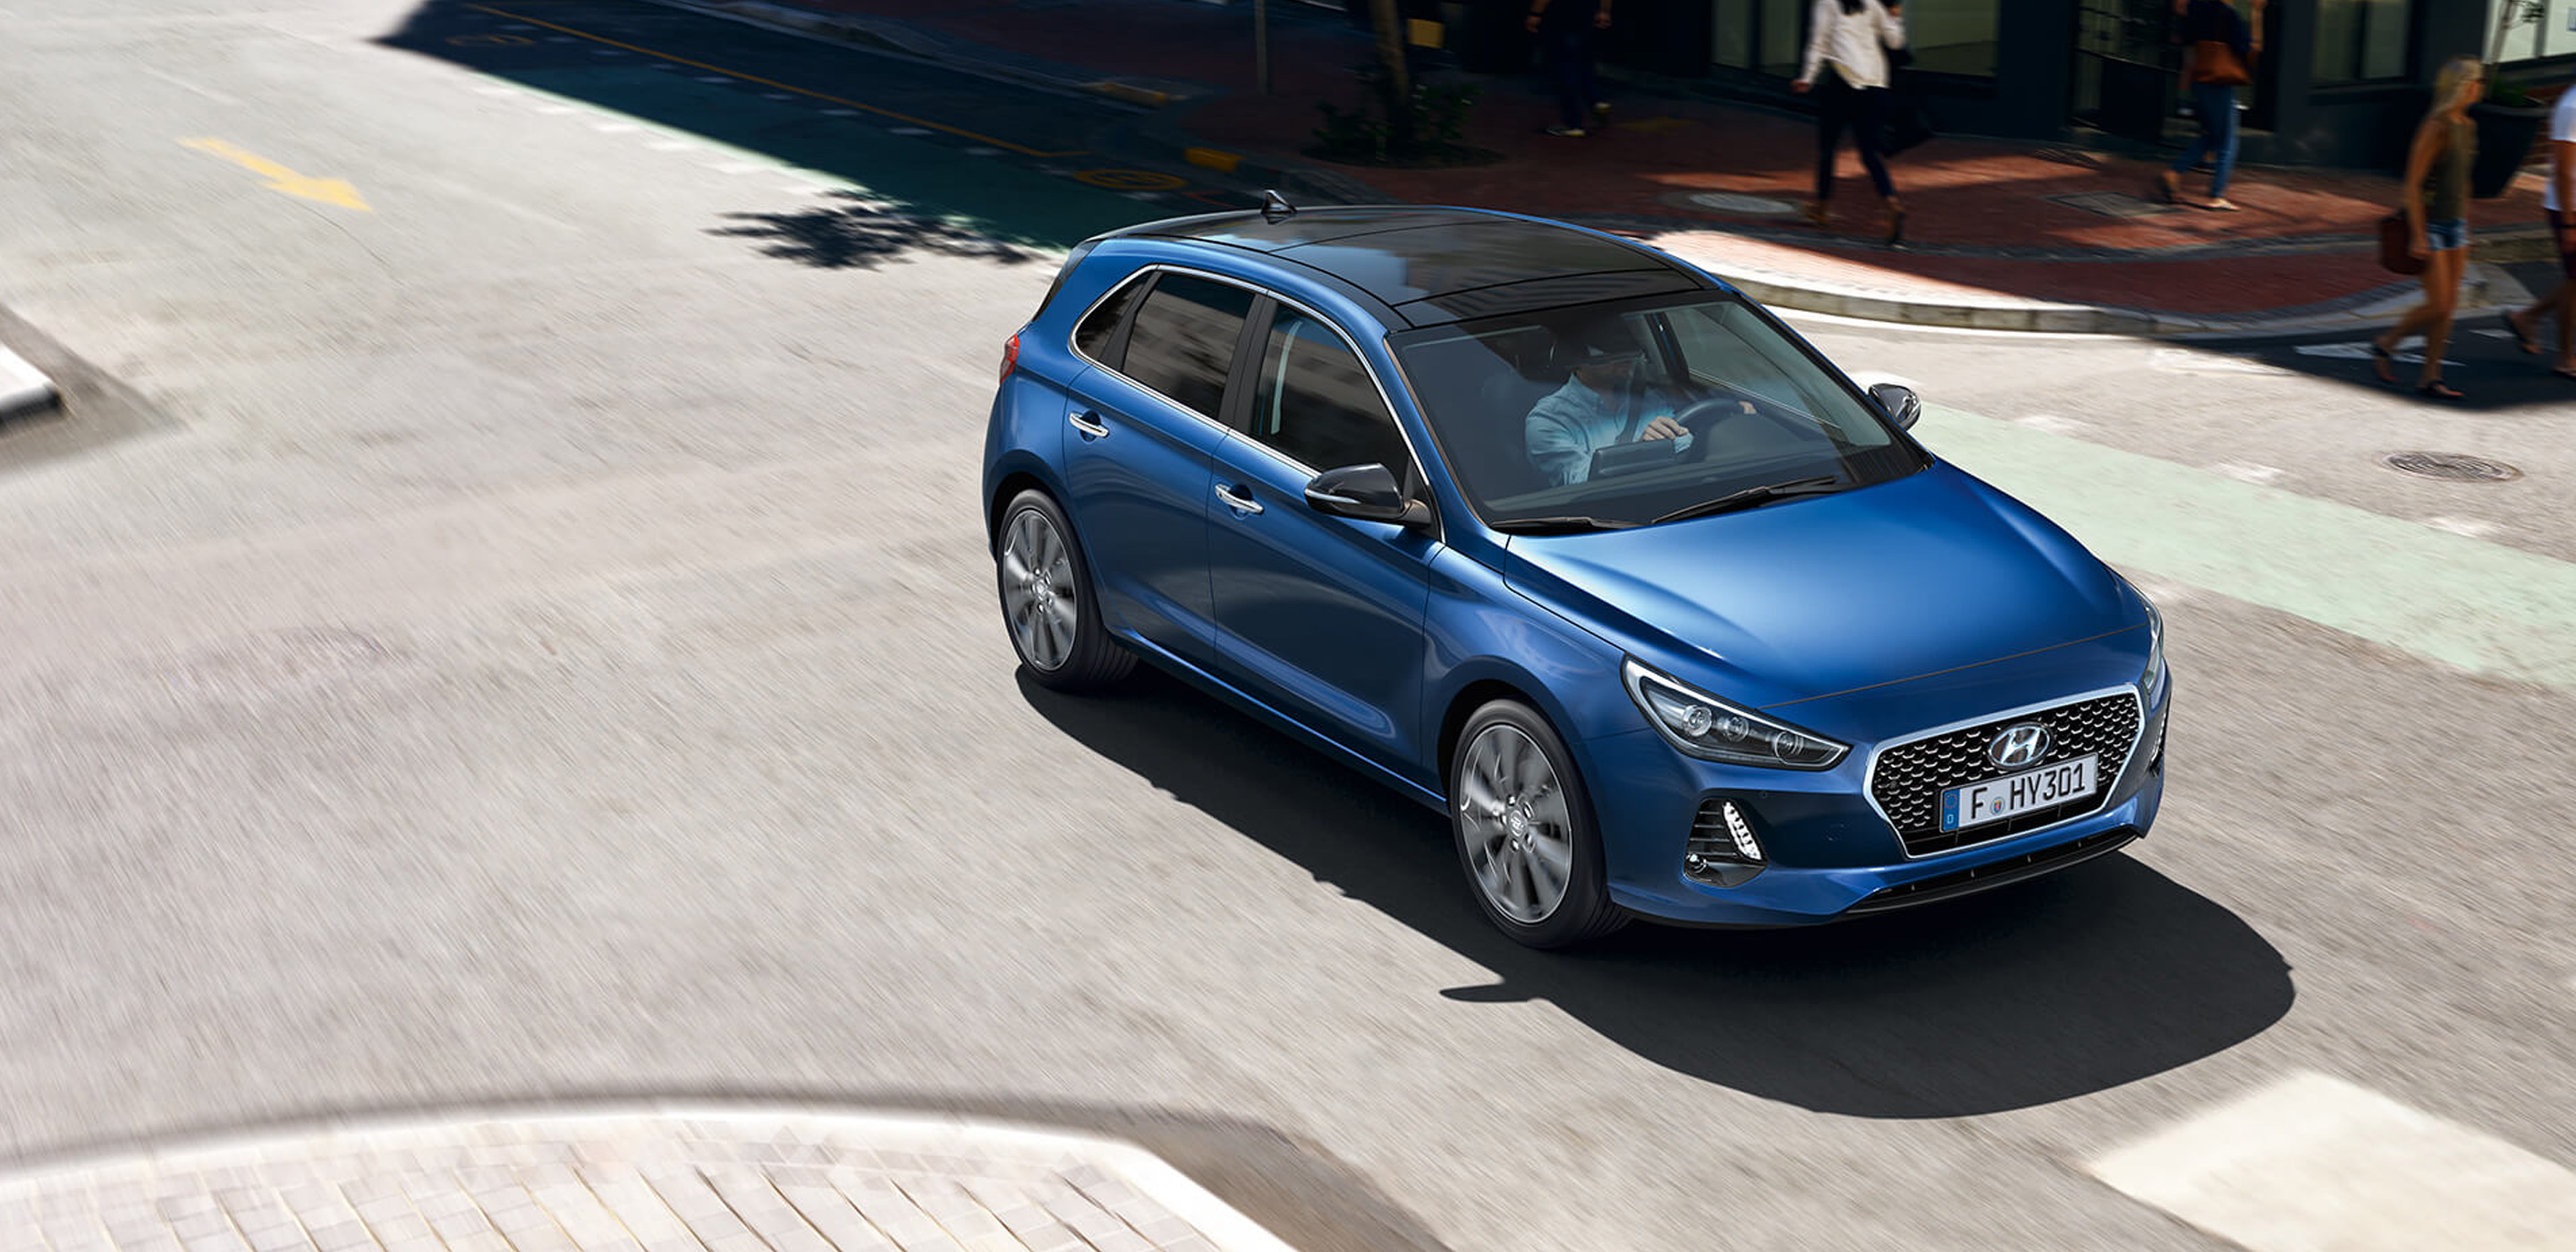 Up to £5,000 off with Hyundai's new scrappage scheme